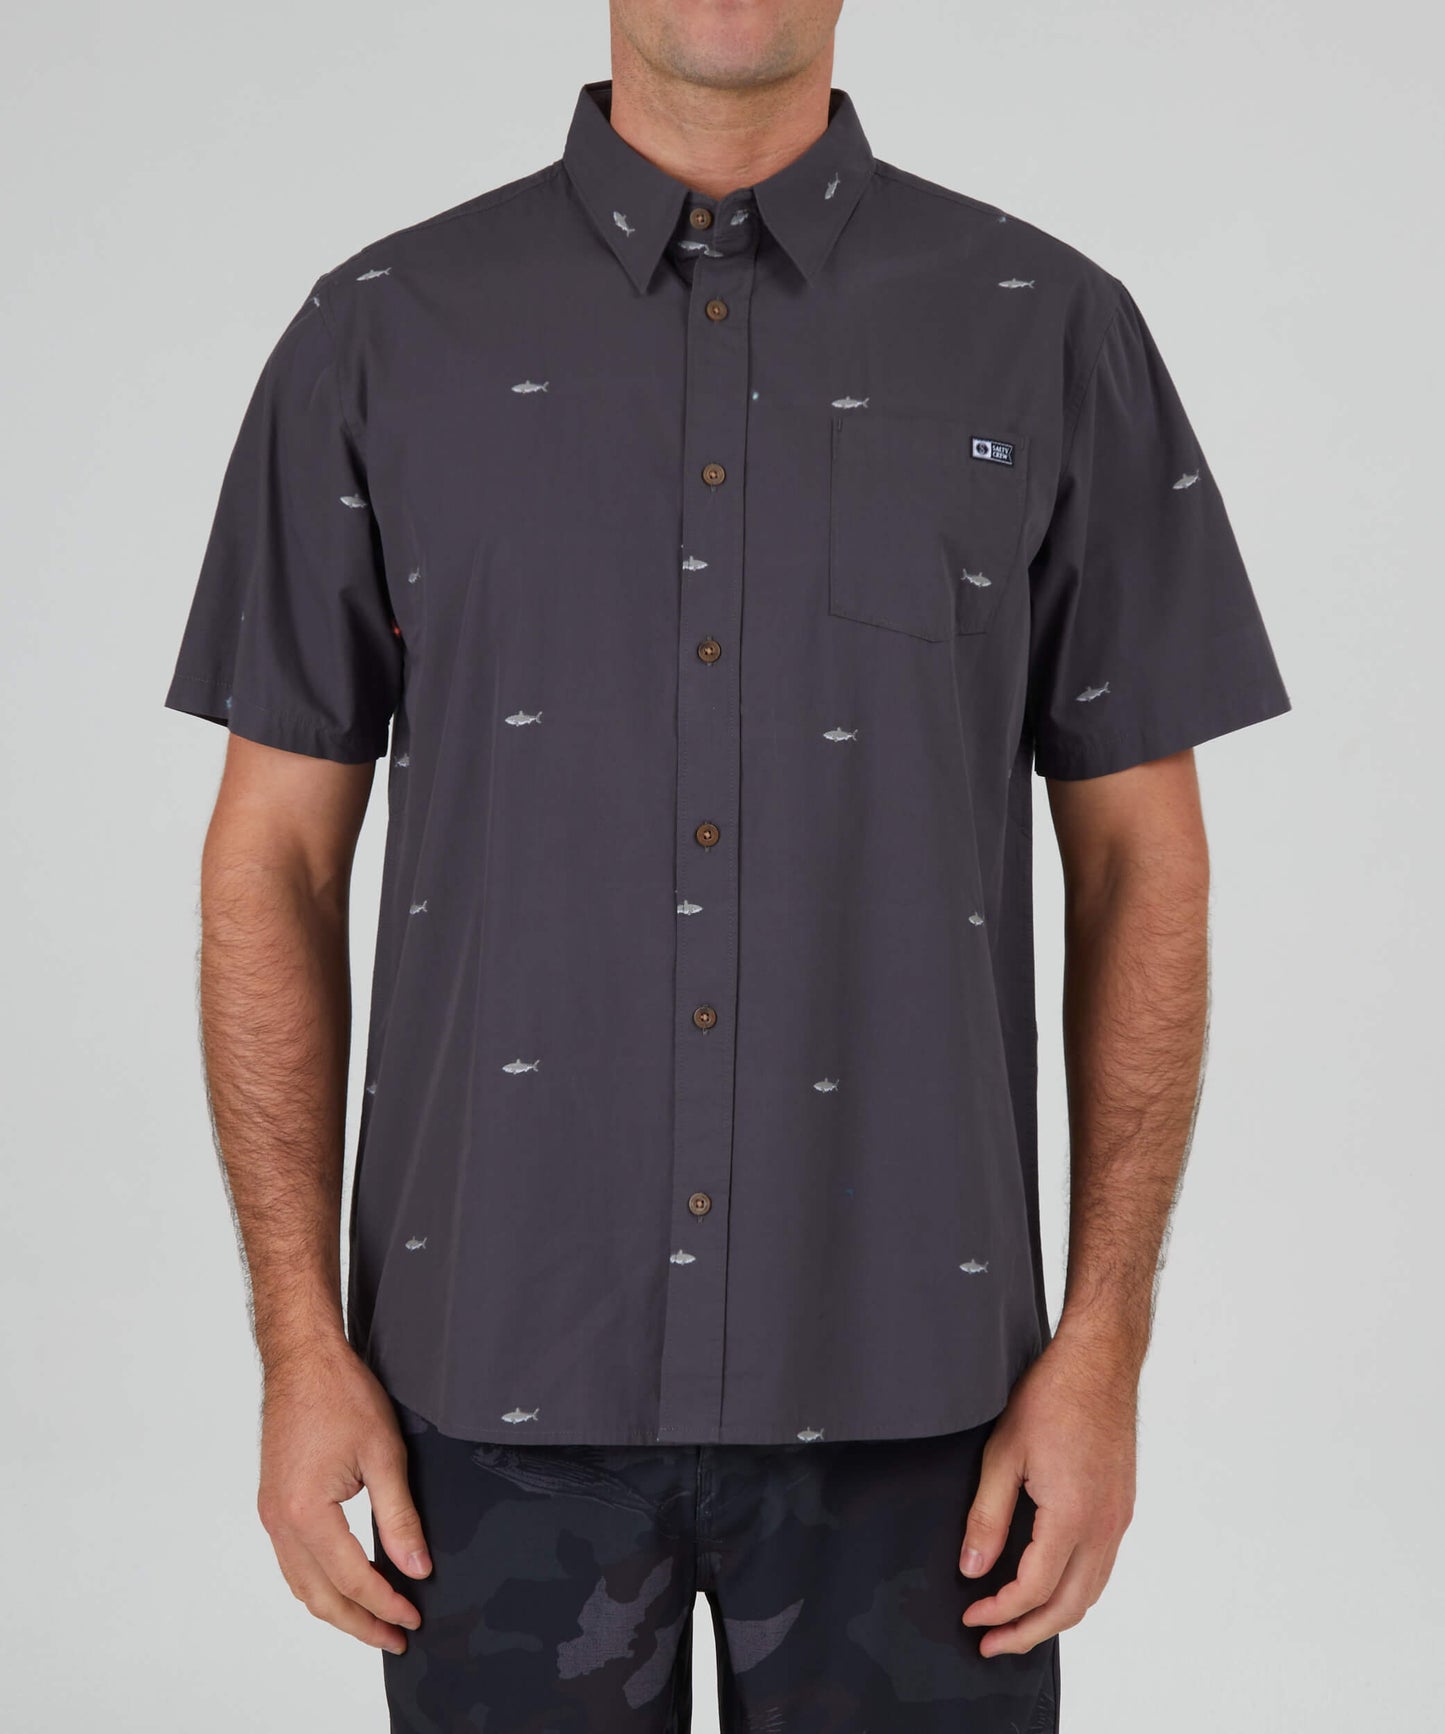 Salty crew WOVEN SHIRTS Bruce S/S Woven - Charcoal in Charcoal